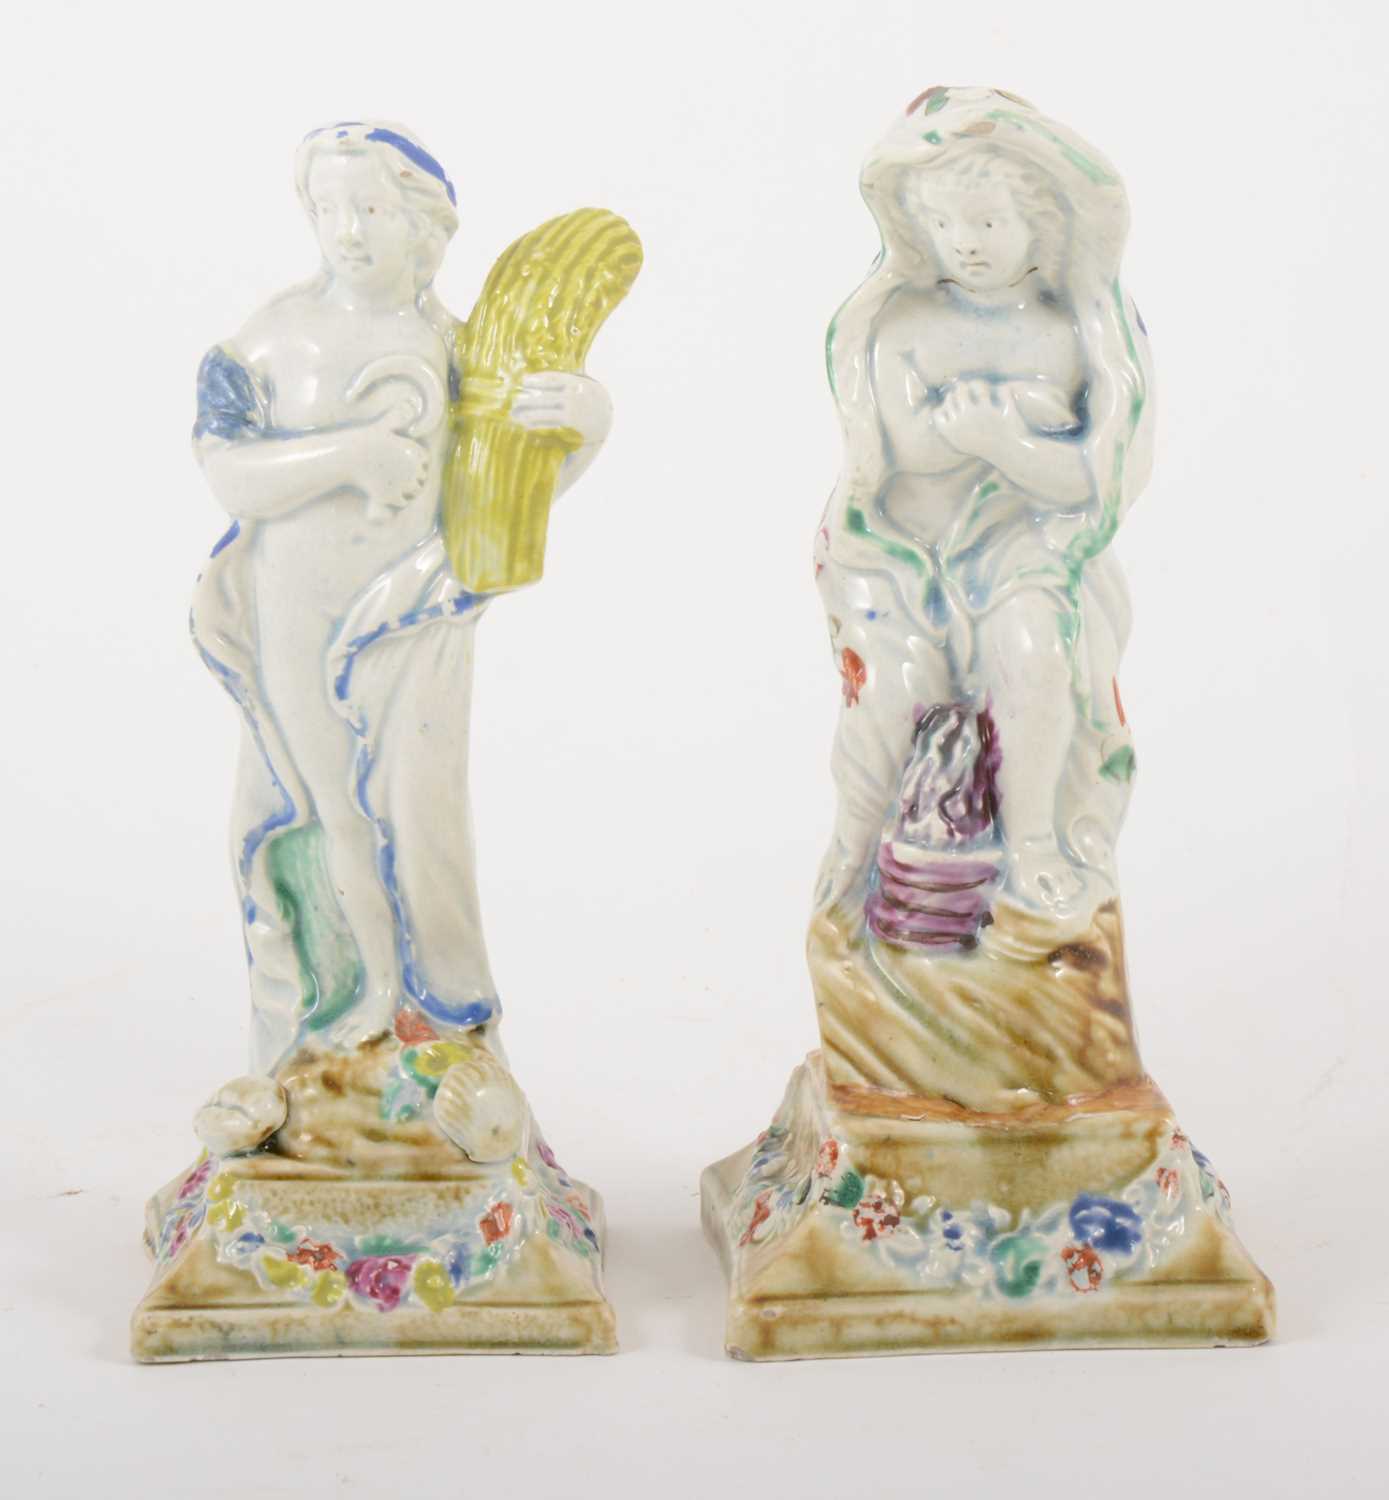 Lot 6 - Two pearlware figures, emblematic of Autumn and Winter, late 18th century